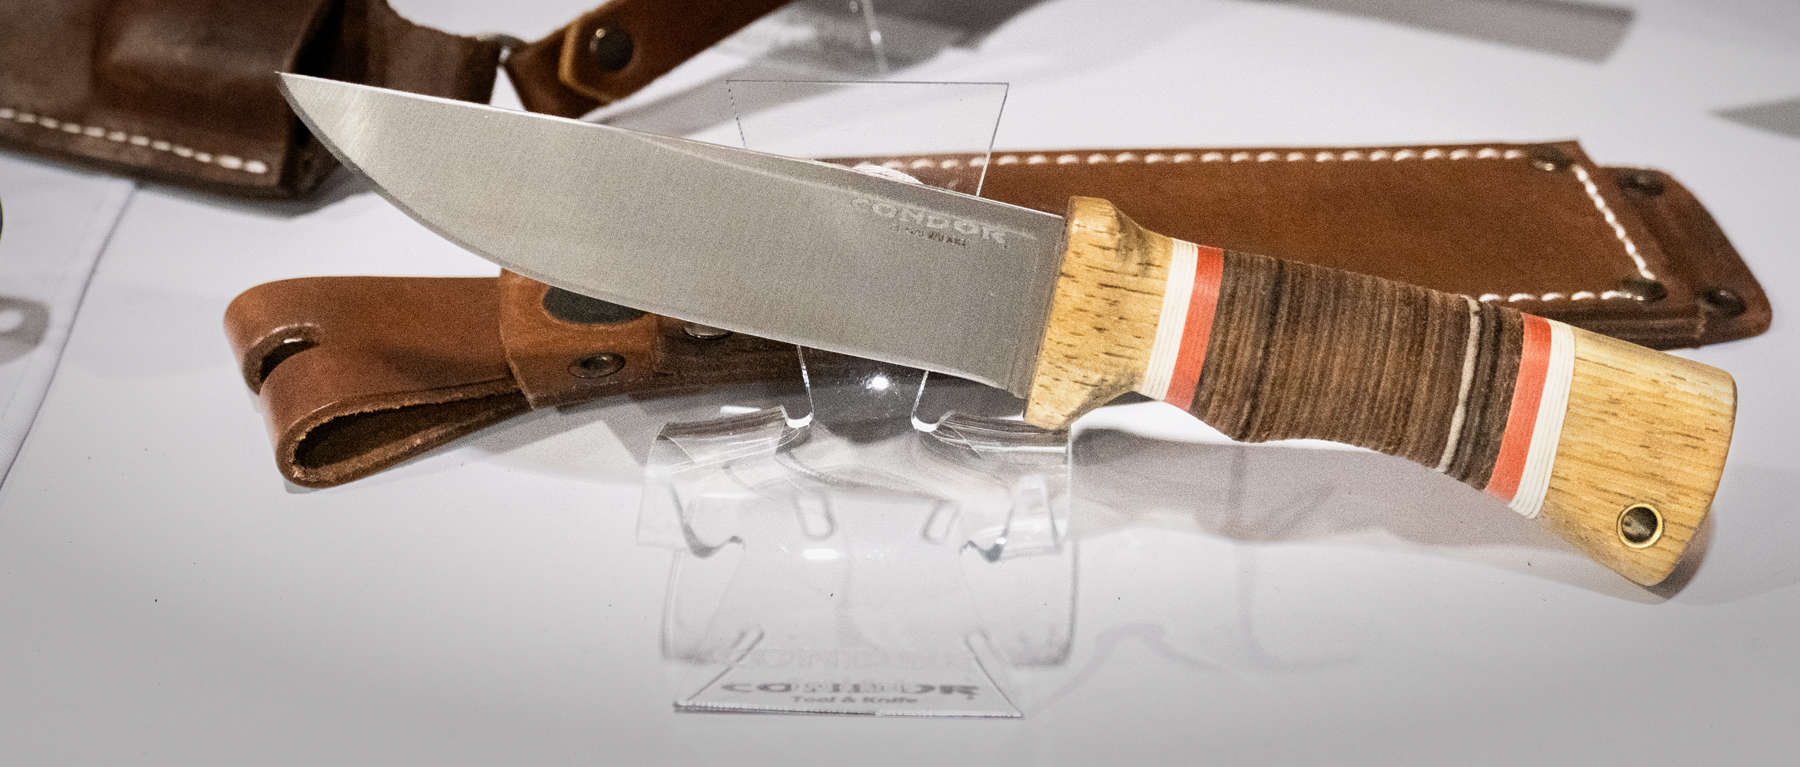 The Condor Country Backroads is a large fixed blade with 1075 steel.